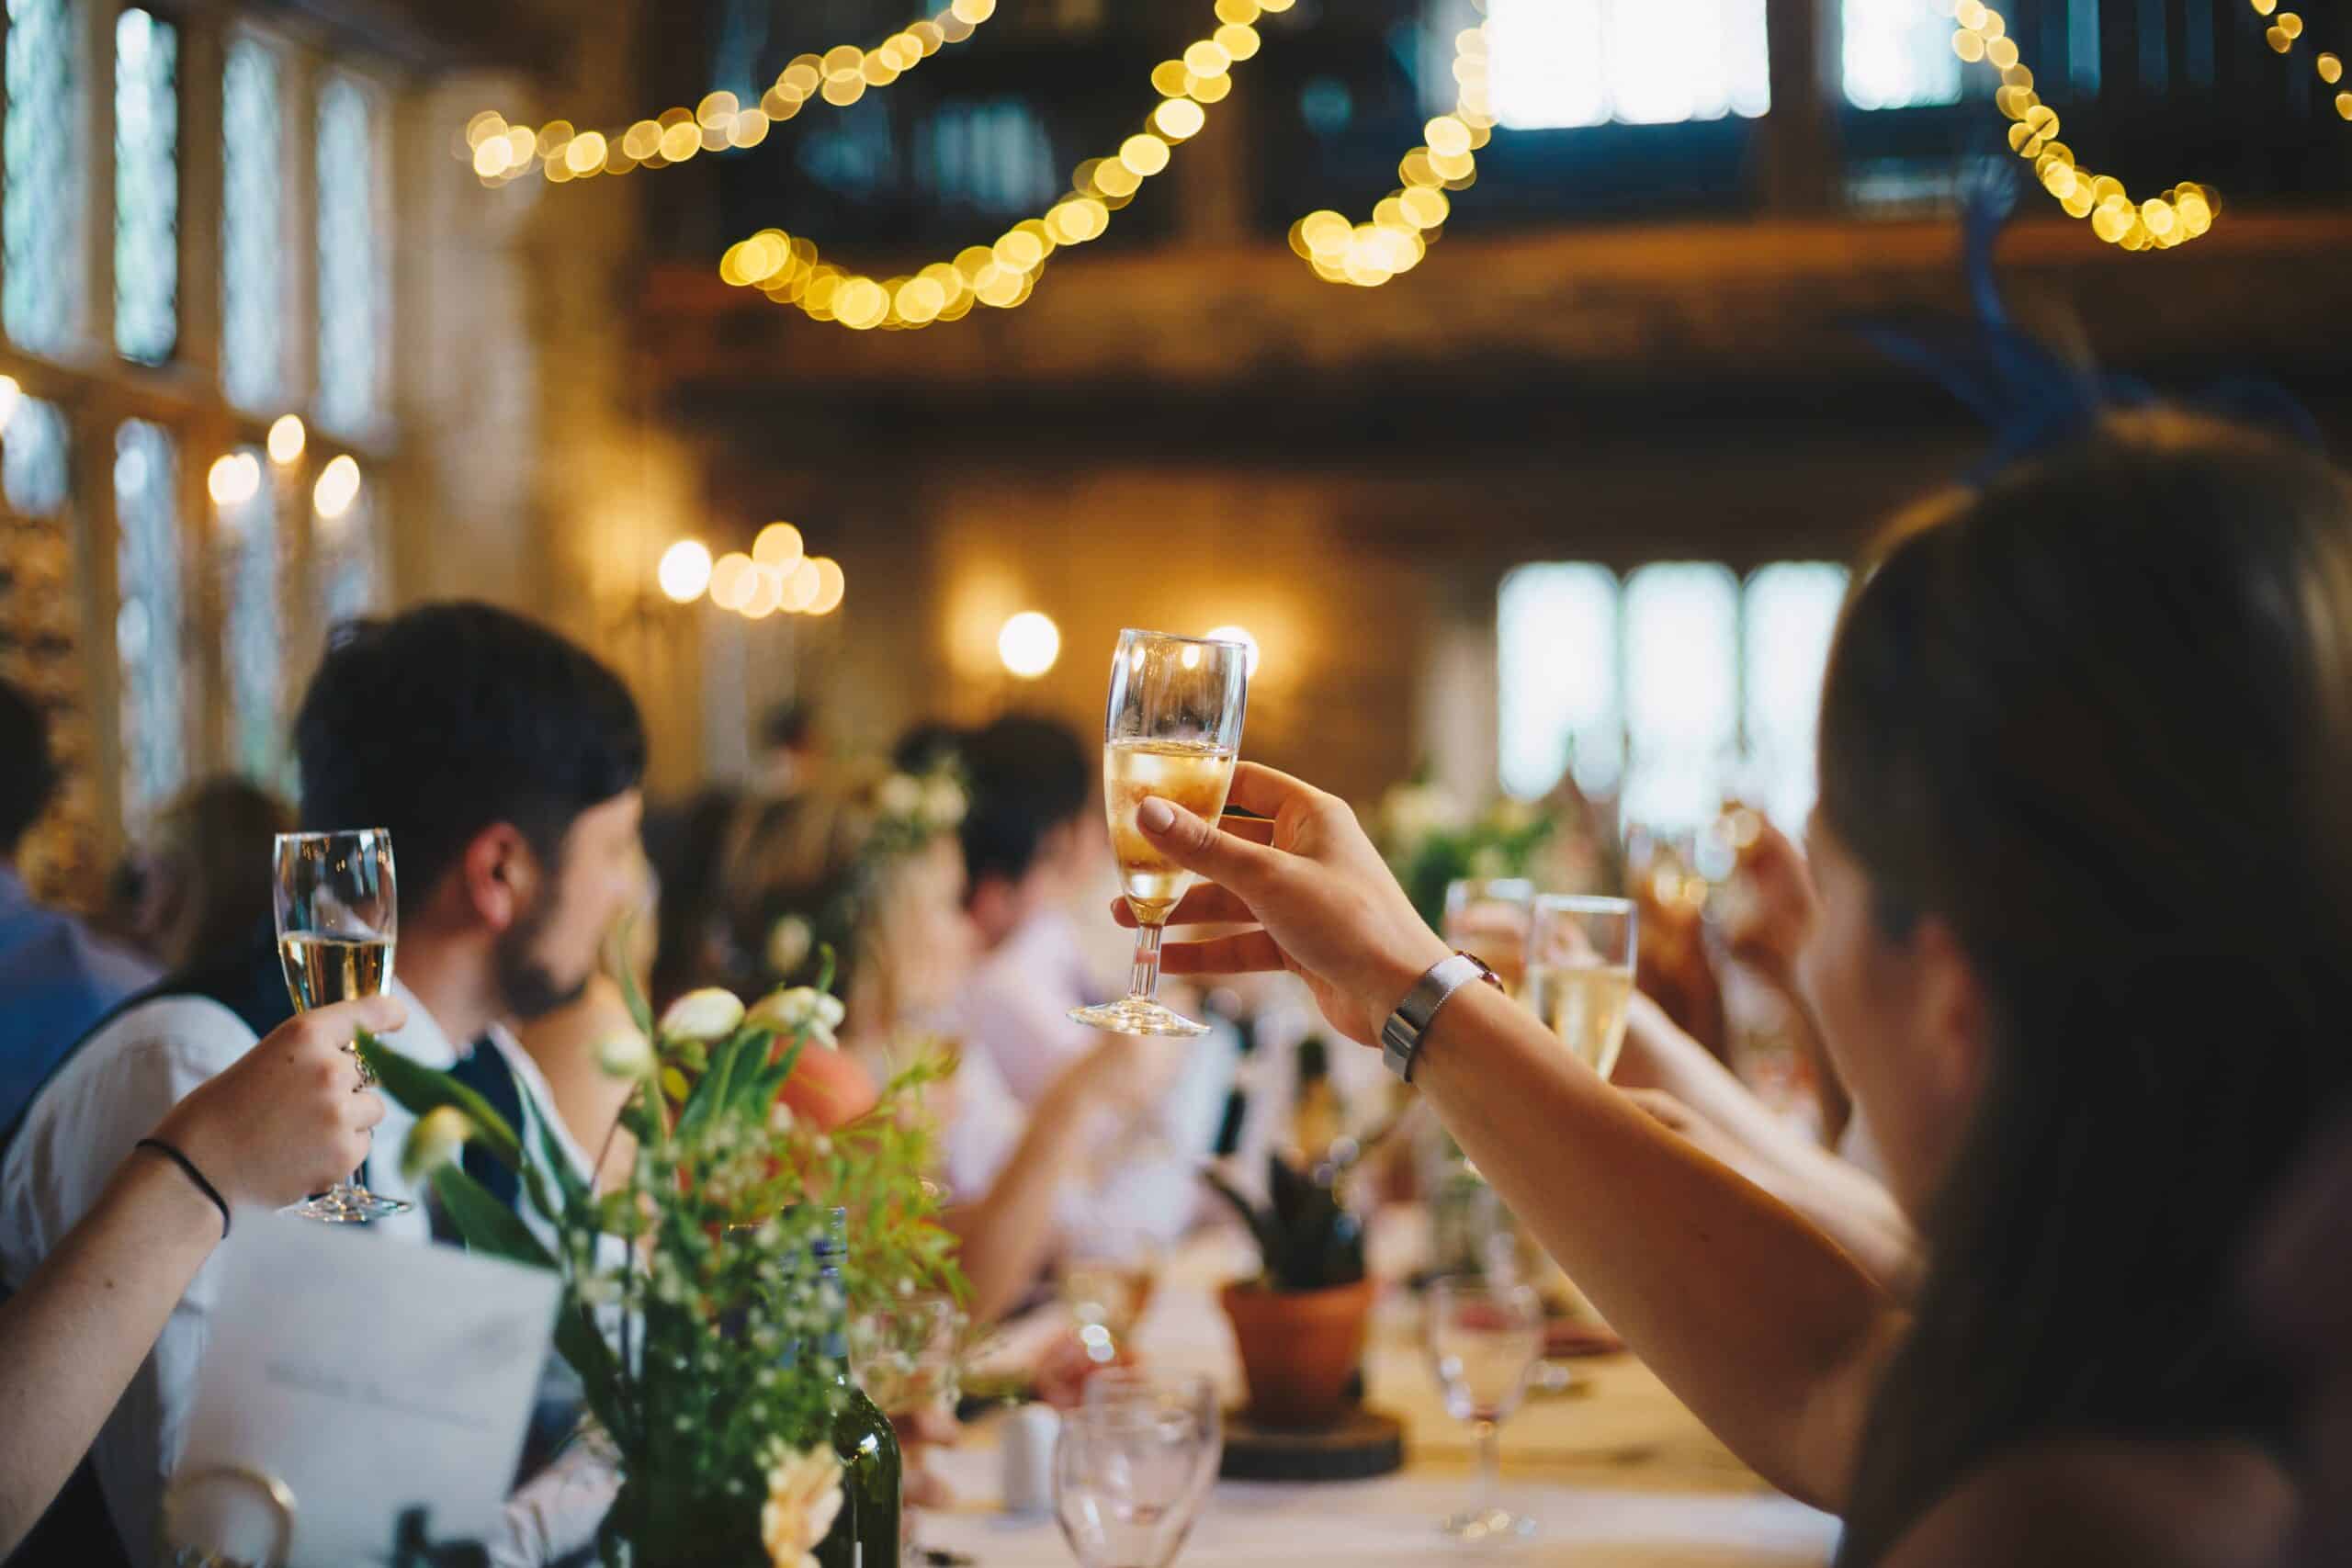 Guests toasting couple on wedding day